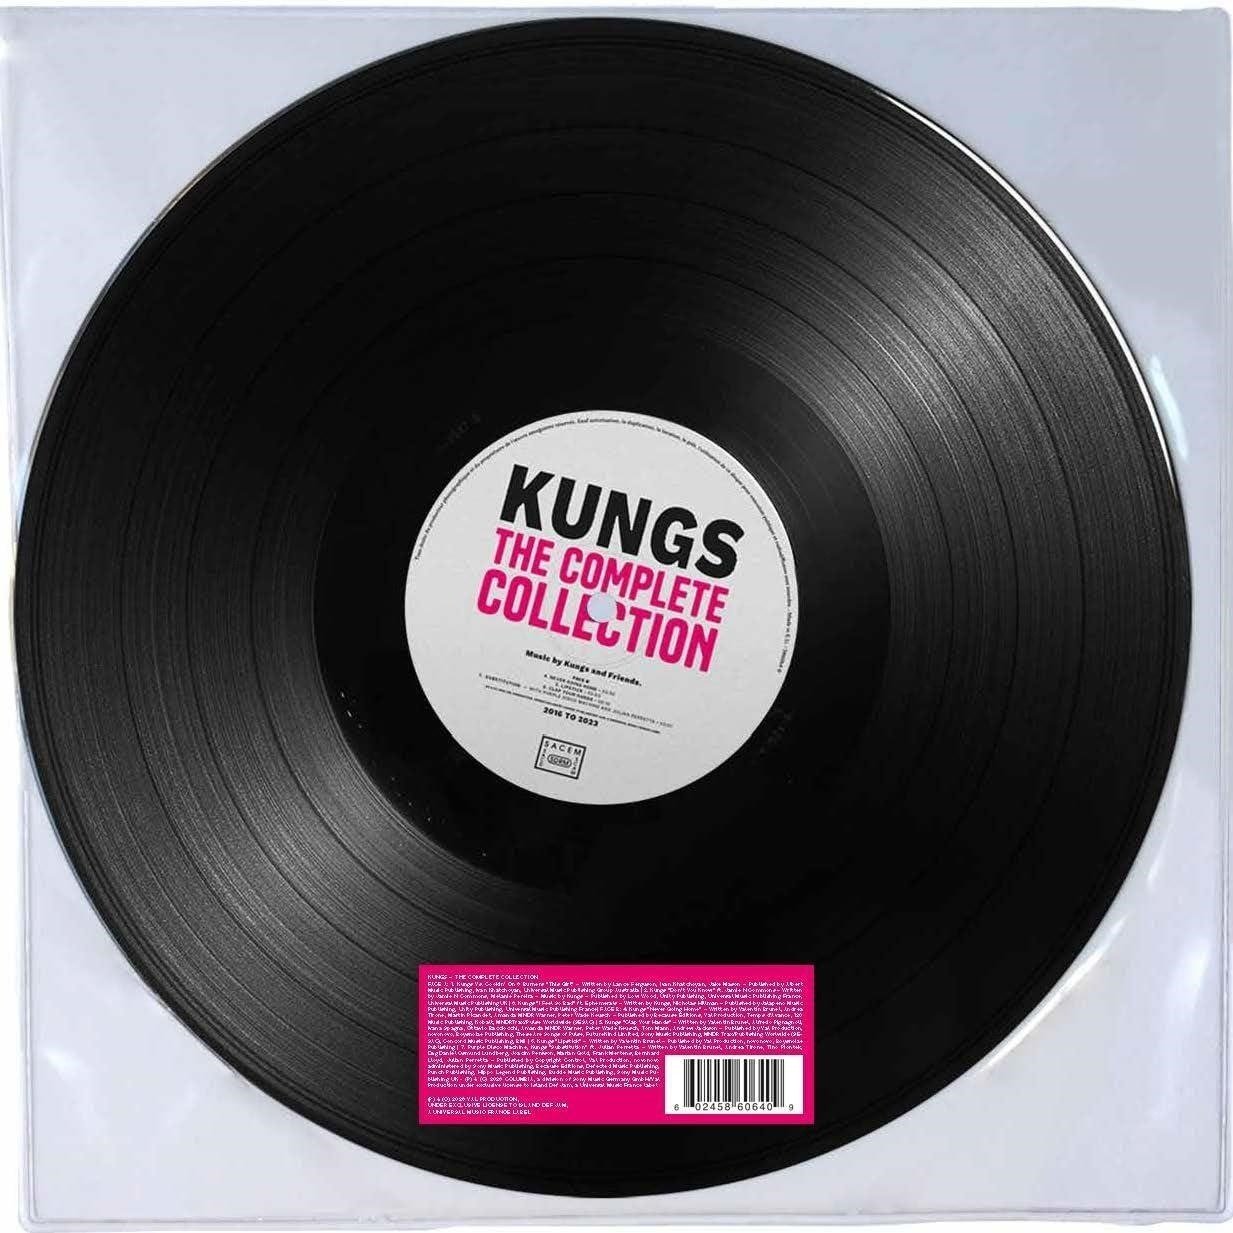 CD Shop - KUNGS THE COMPLETE COLLECTION